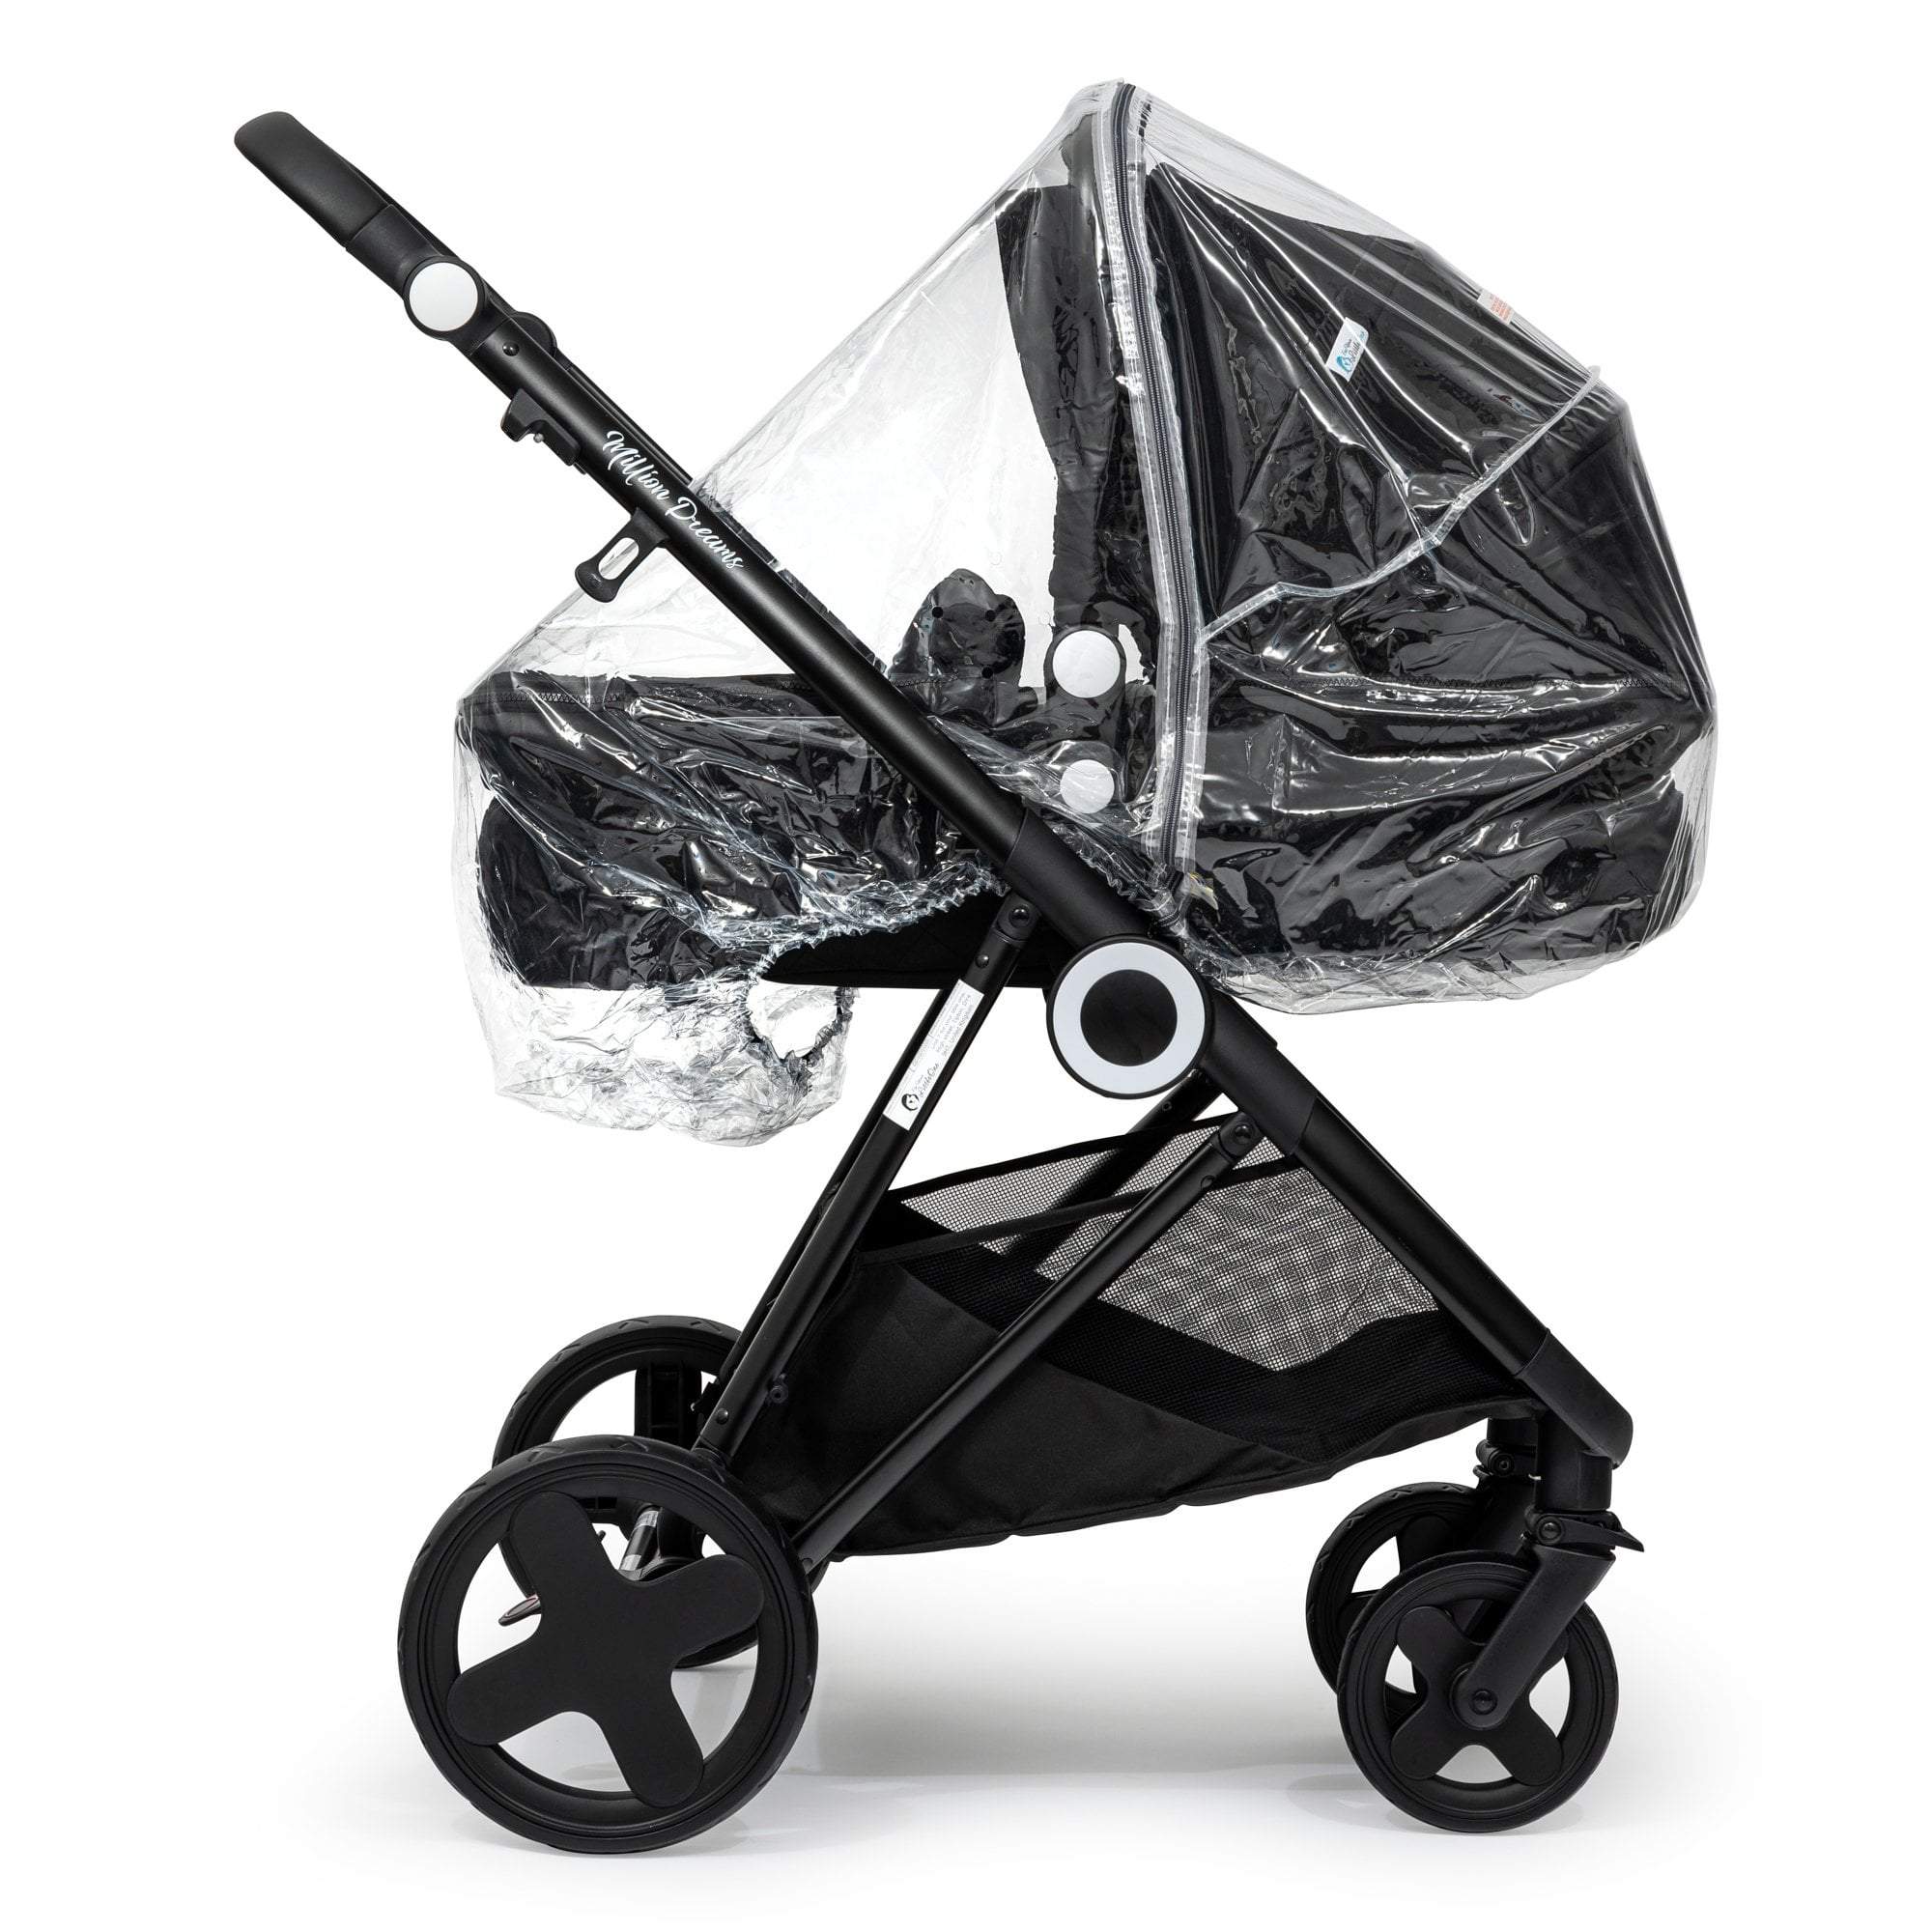 Carrycot Raincover Compatible With Excel - Fits All Models - For Your Little One